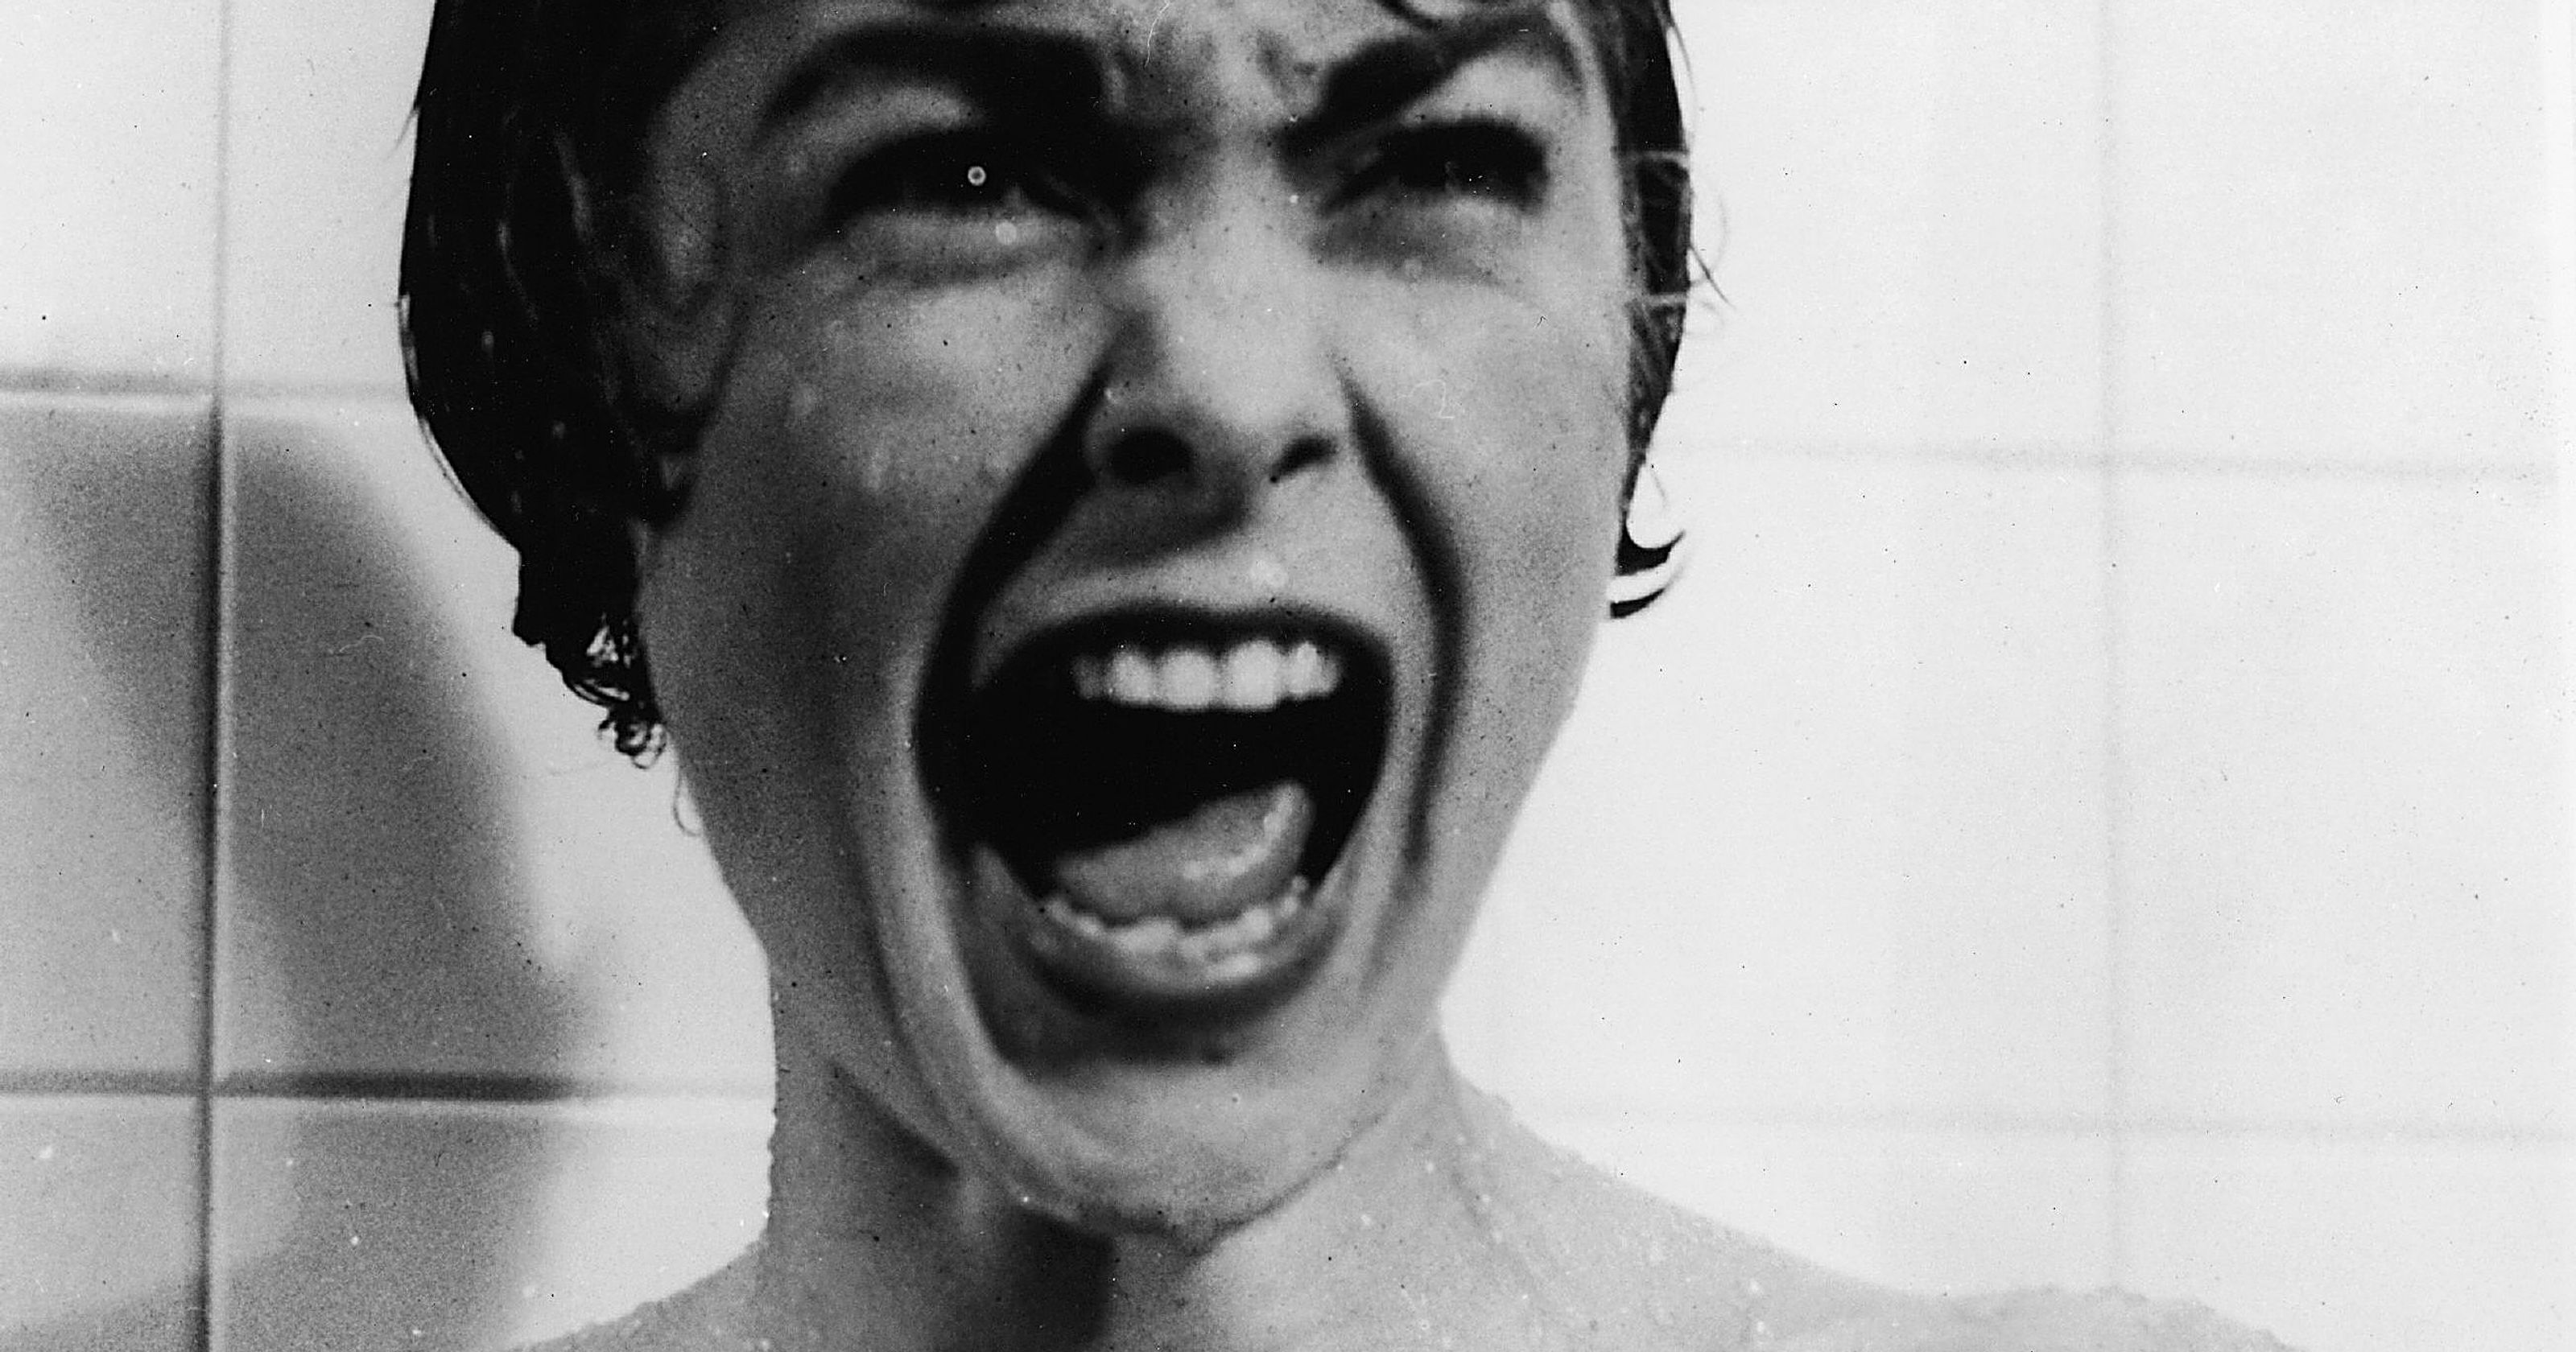 What 1980s Stereotype Are You? Psycho movie